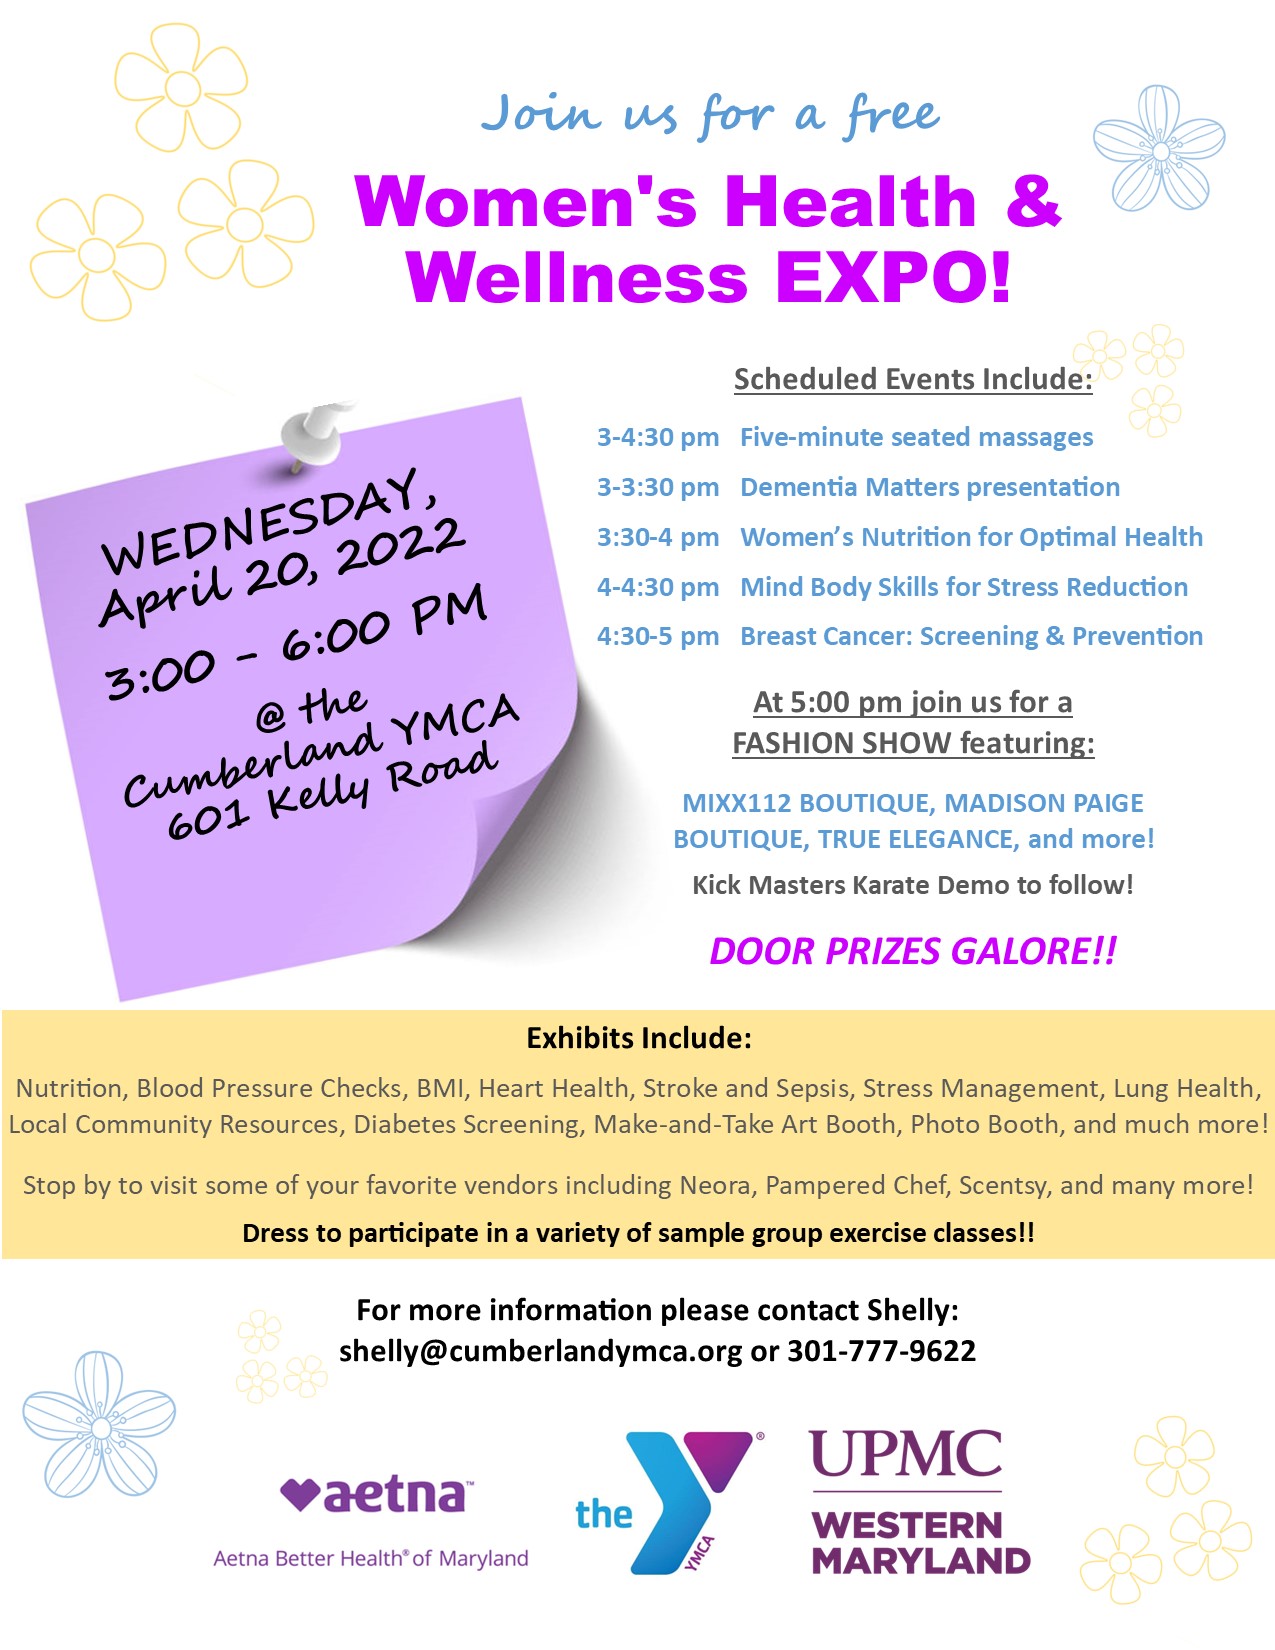 Women's Wellness Expo: Wednesday April 20 from 3-6 PM at the Cumberland (Riverside YMCA)